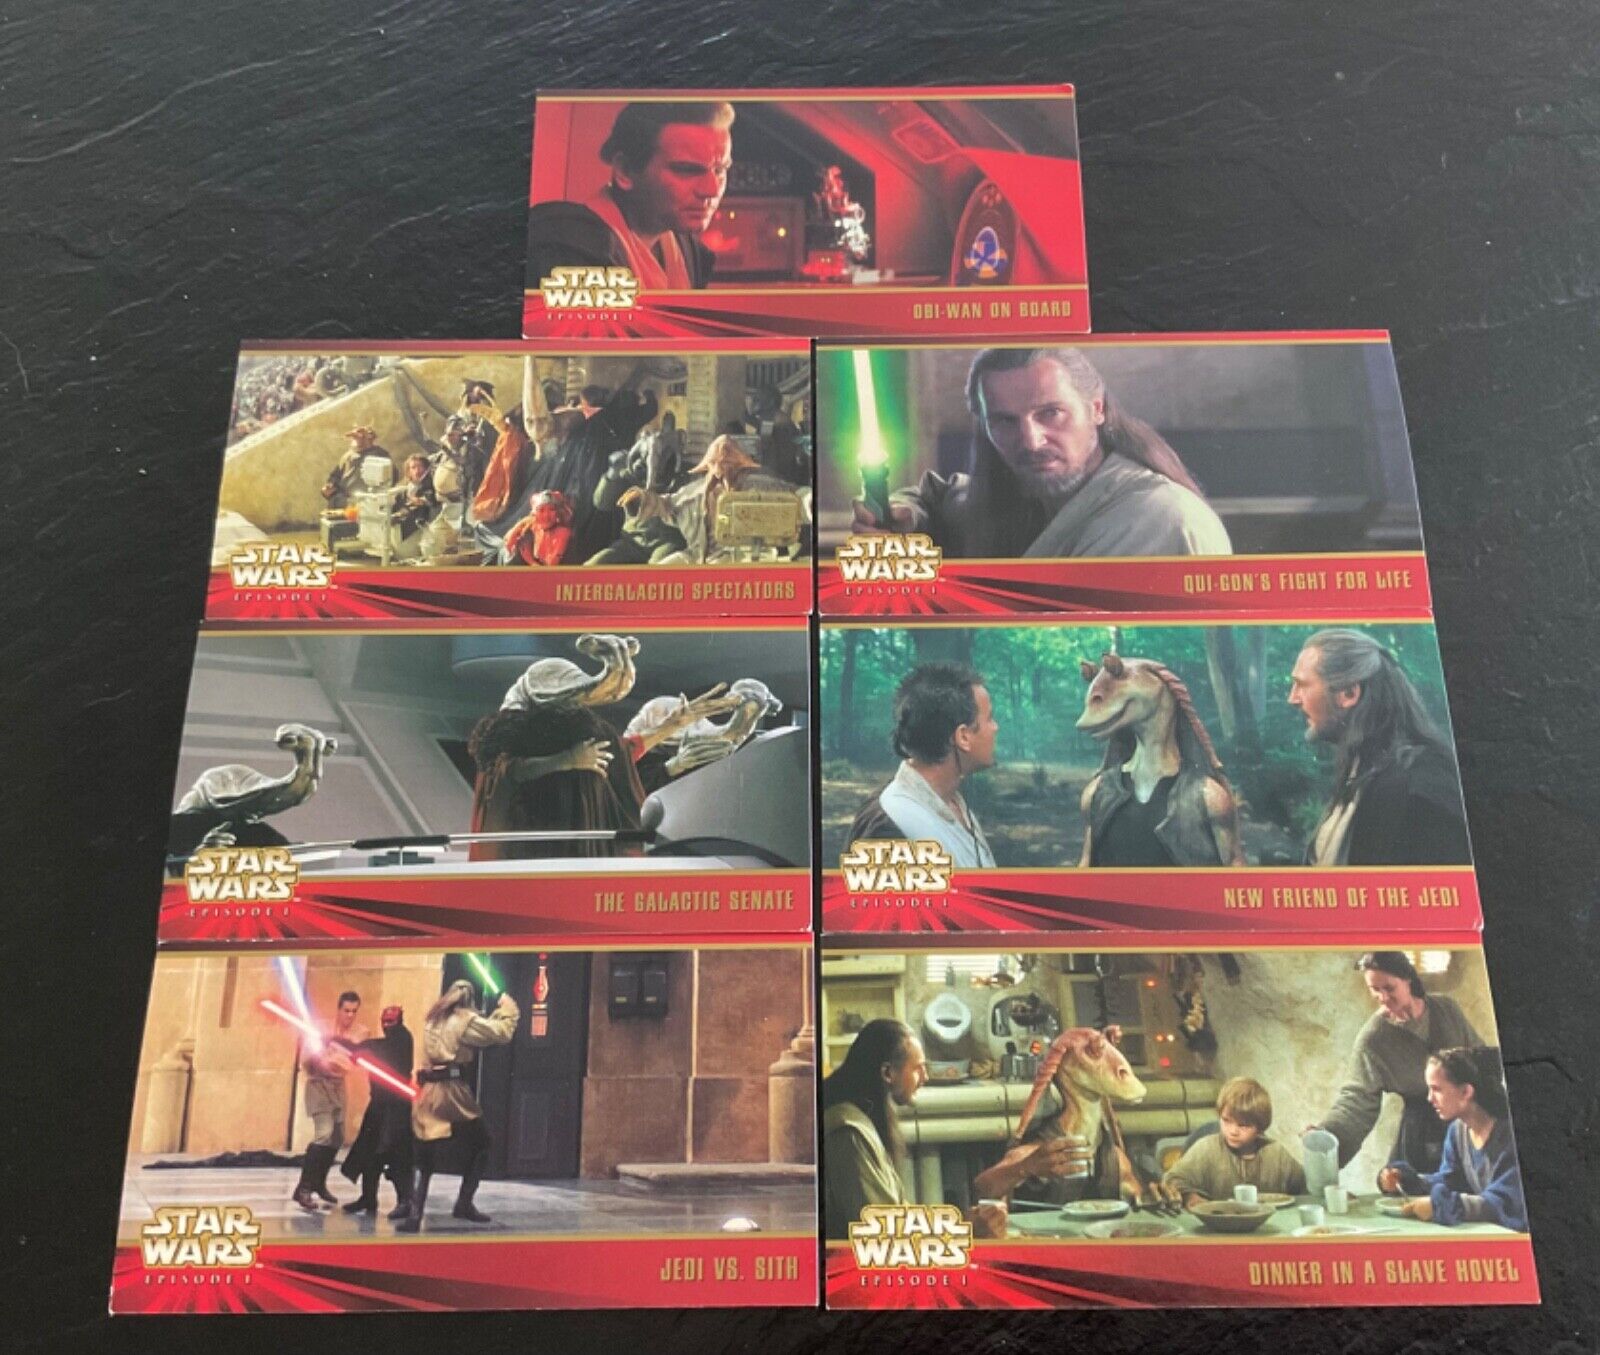 Lot of 7 STAR WARS Episode 1 WIDEVISION TRADING CARDS  #8-27-34-47-55-70-74